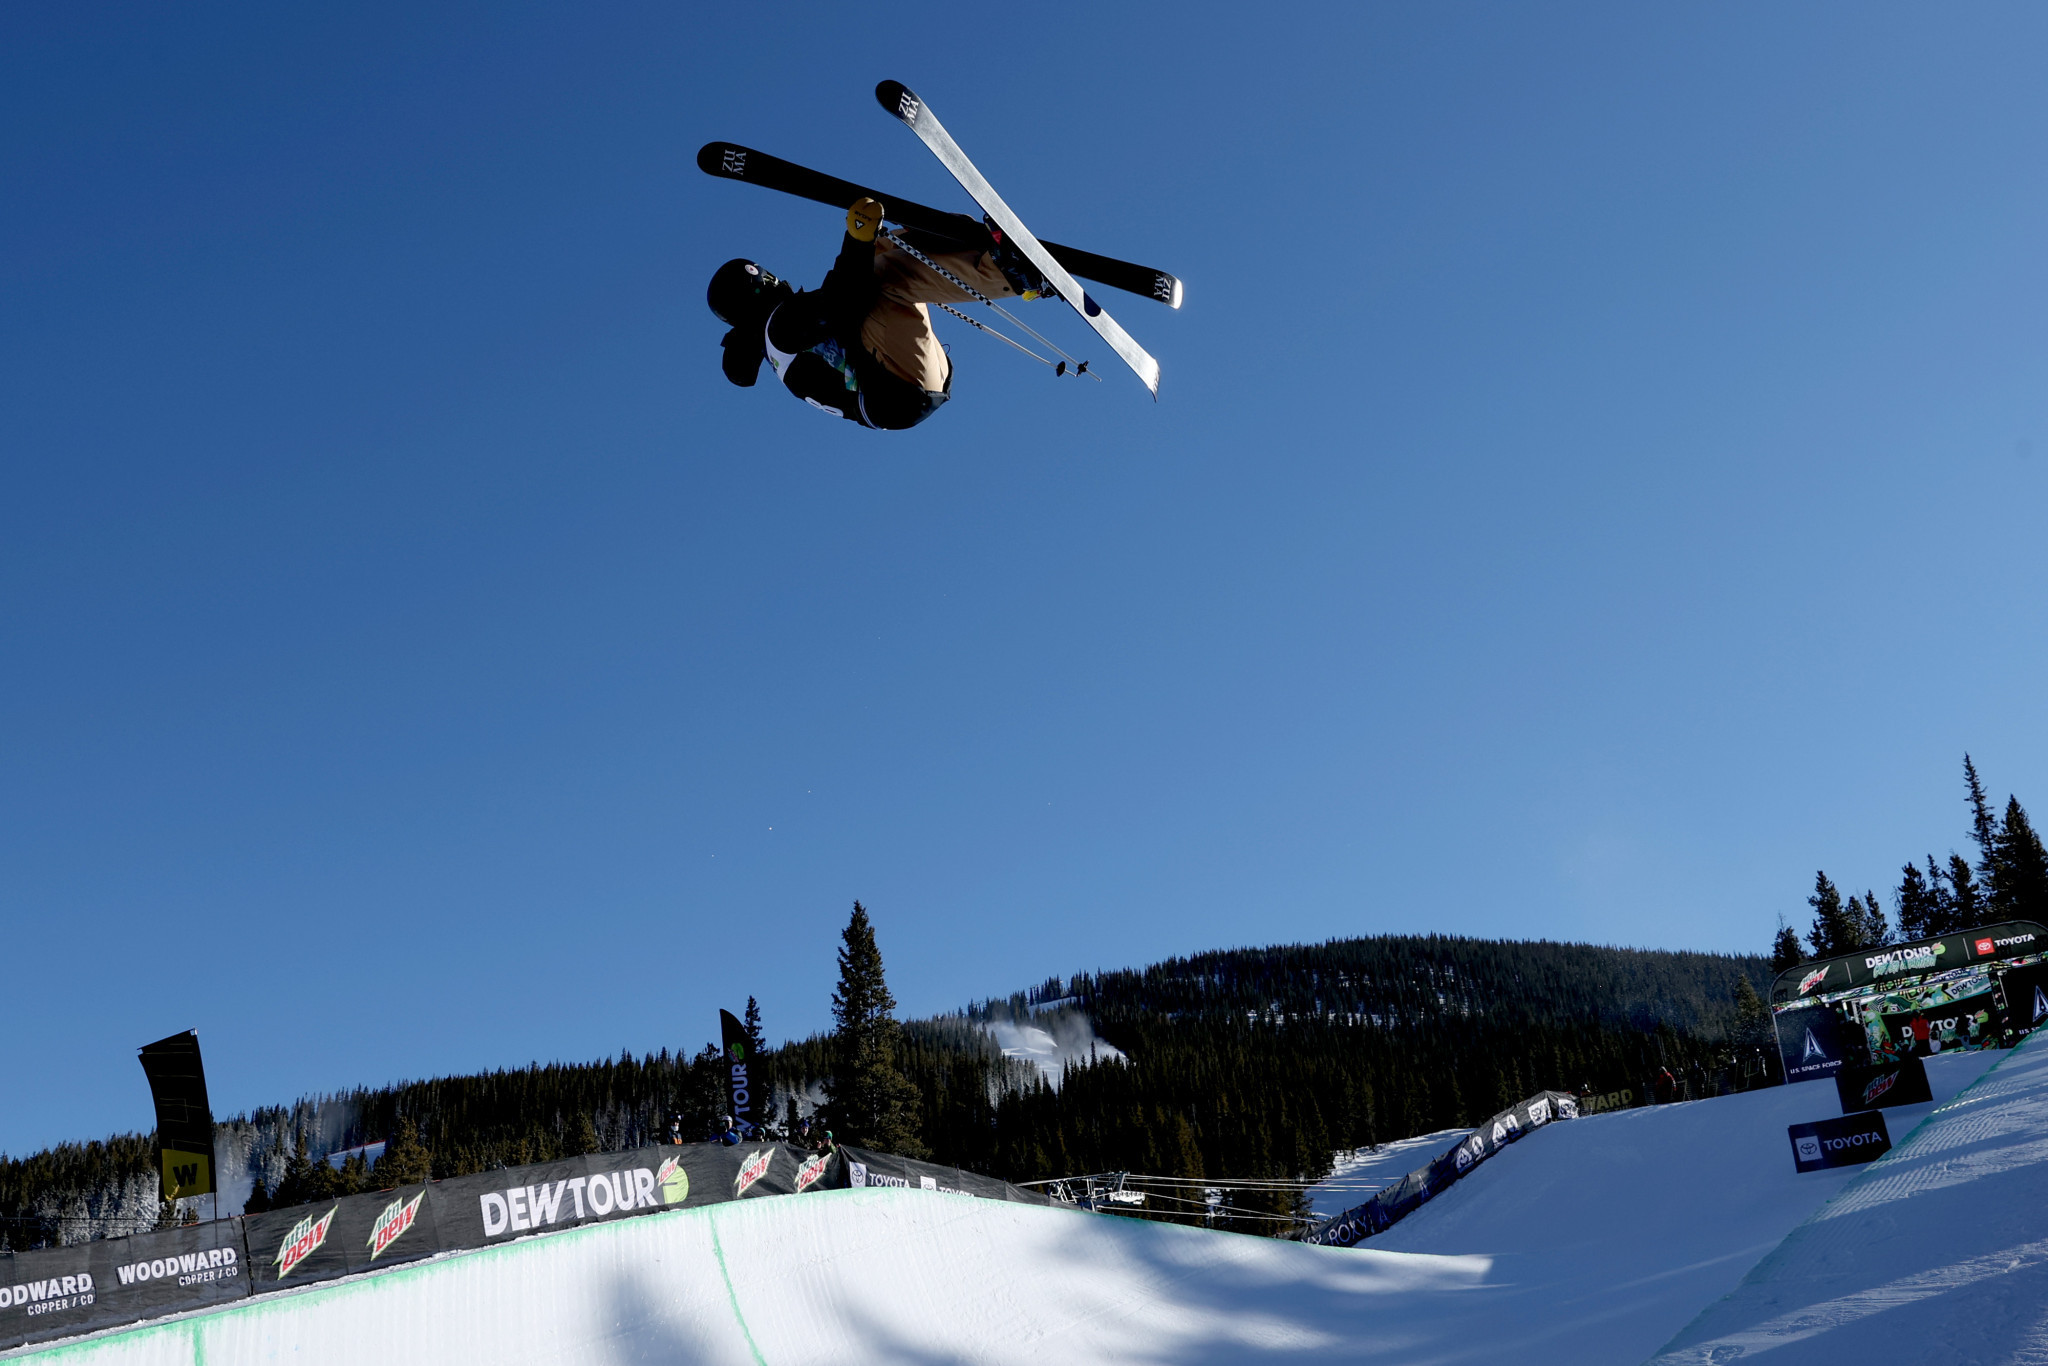 Canada's Brendan Mackay is the top of the men's halfpipe standings in what has so far been a momentous season ©Getty Images